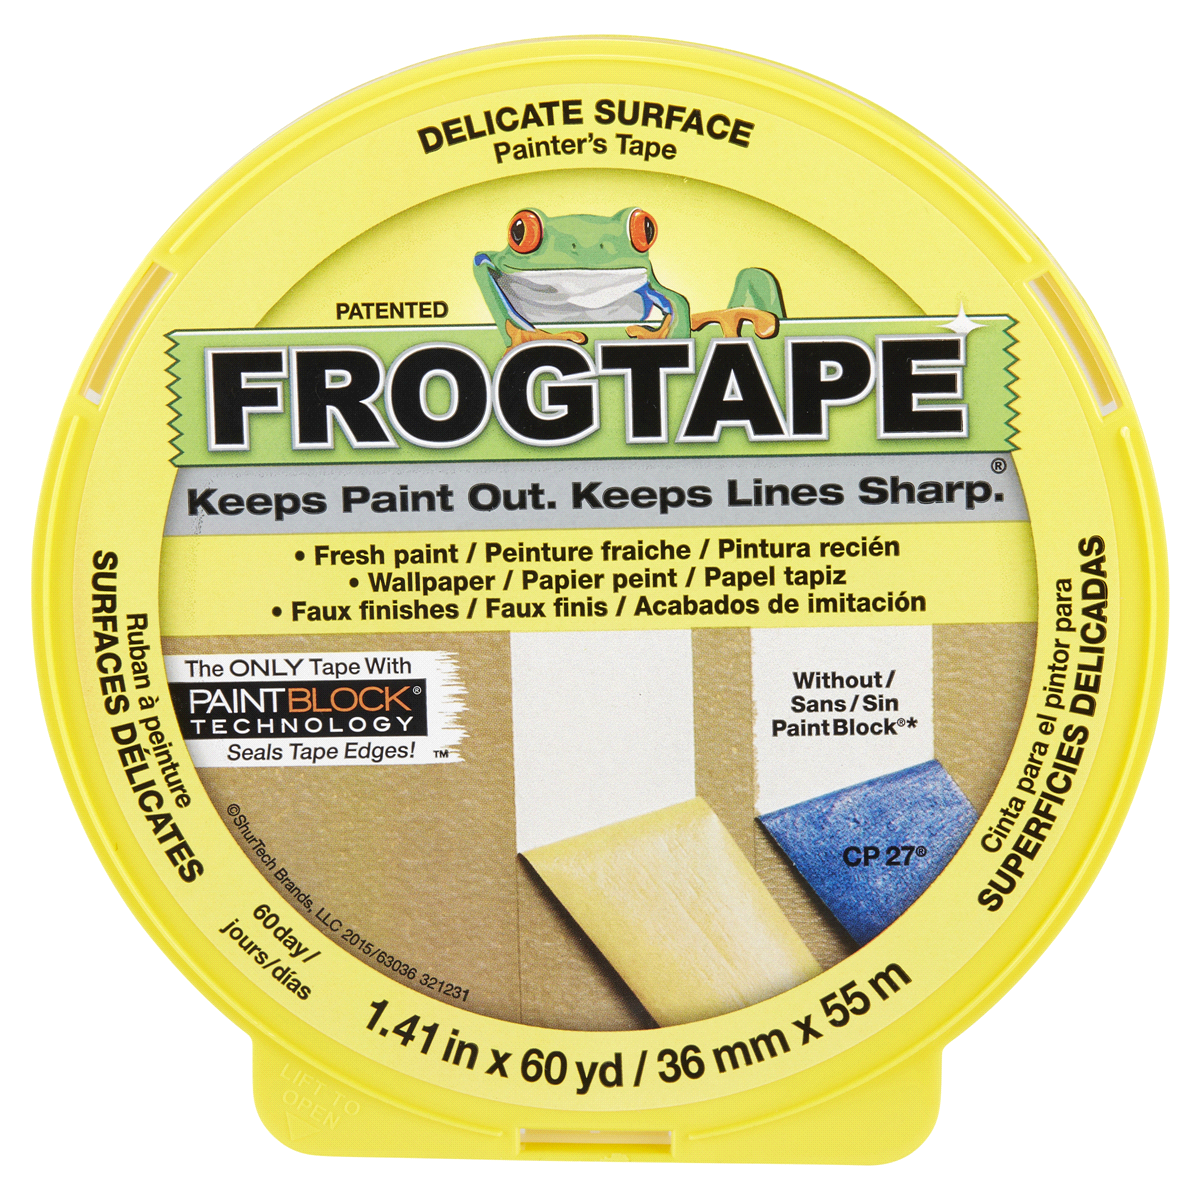 slide 1 of 29, DUCK FrogTape Delicate Surface Painting Tape, Yellow, 1.41 in. x 60 yd., 60 yd x 1.31 in